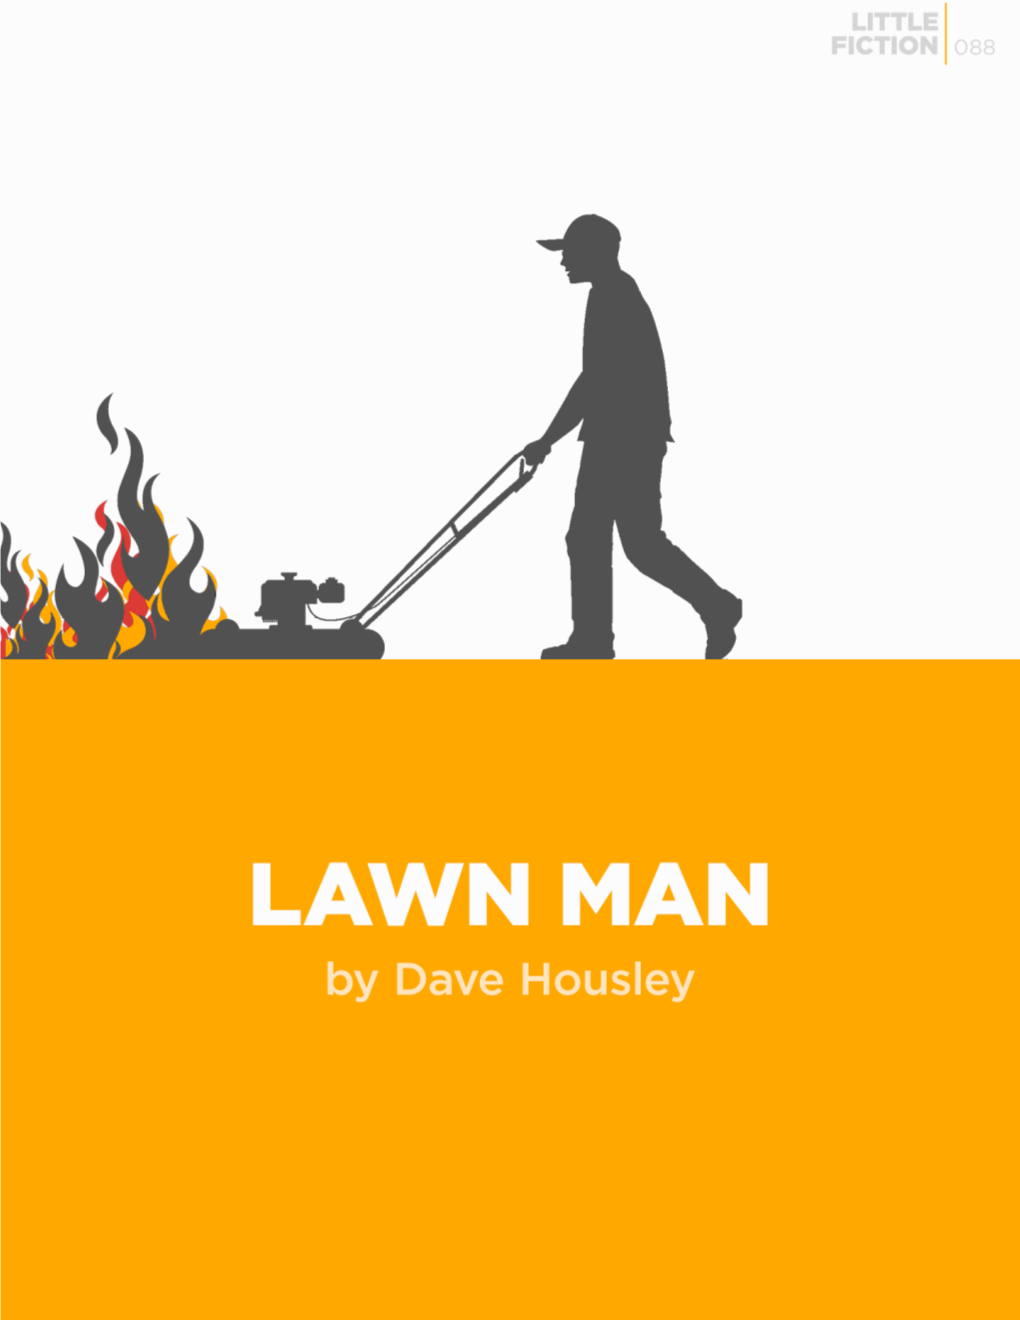 “Lawn Man Don't Give a Fuck!” They Would